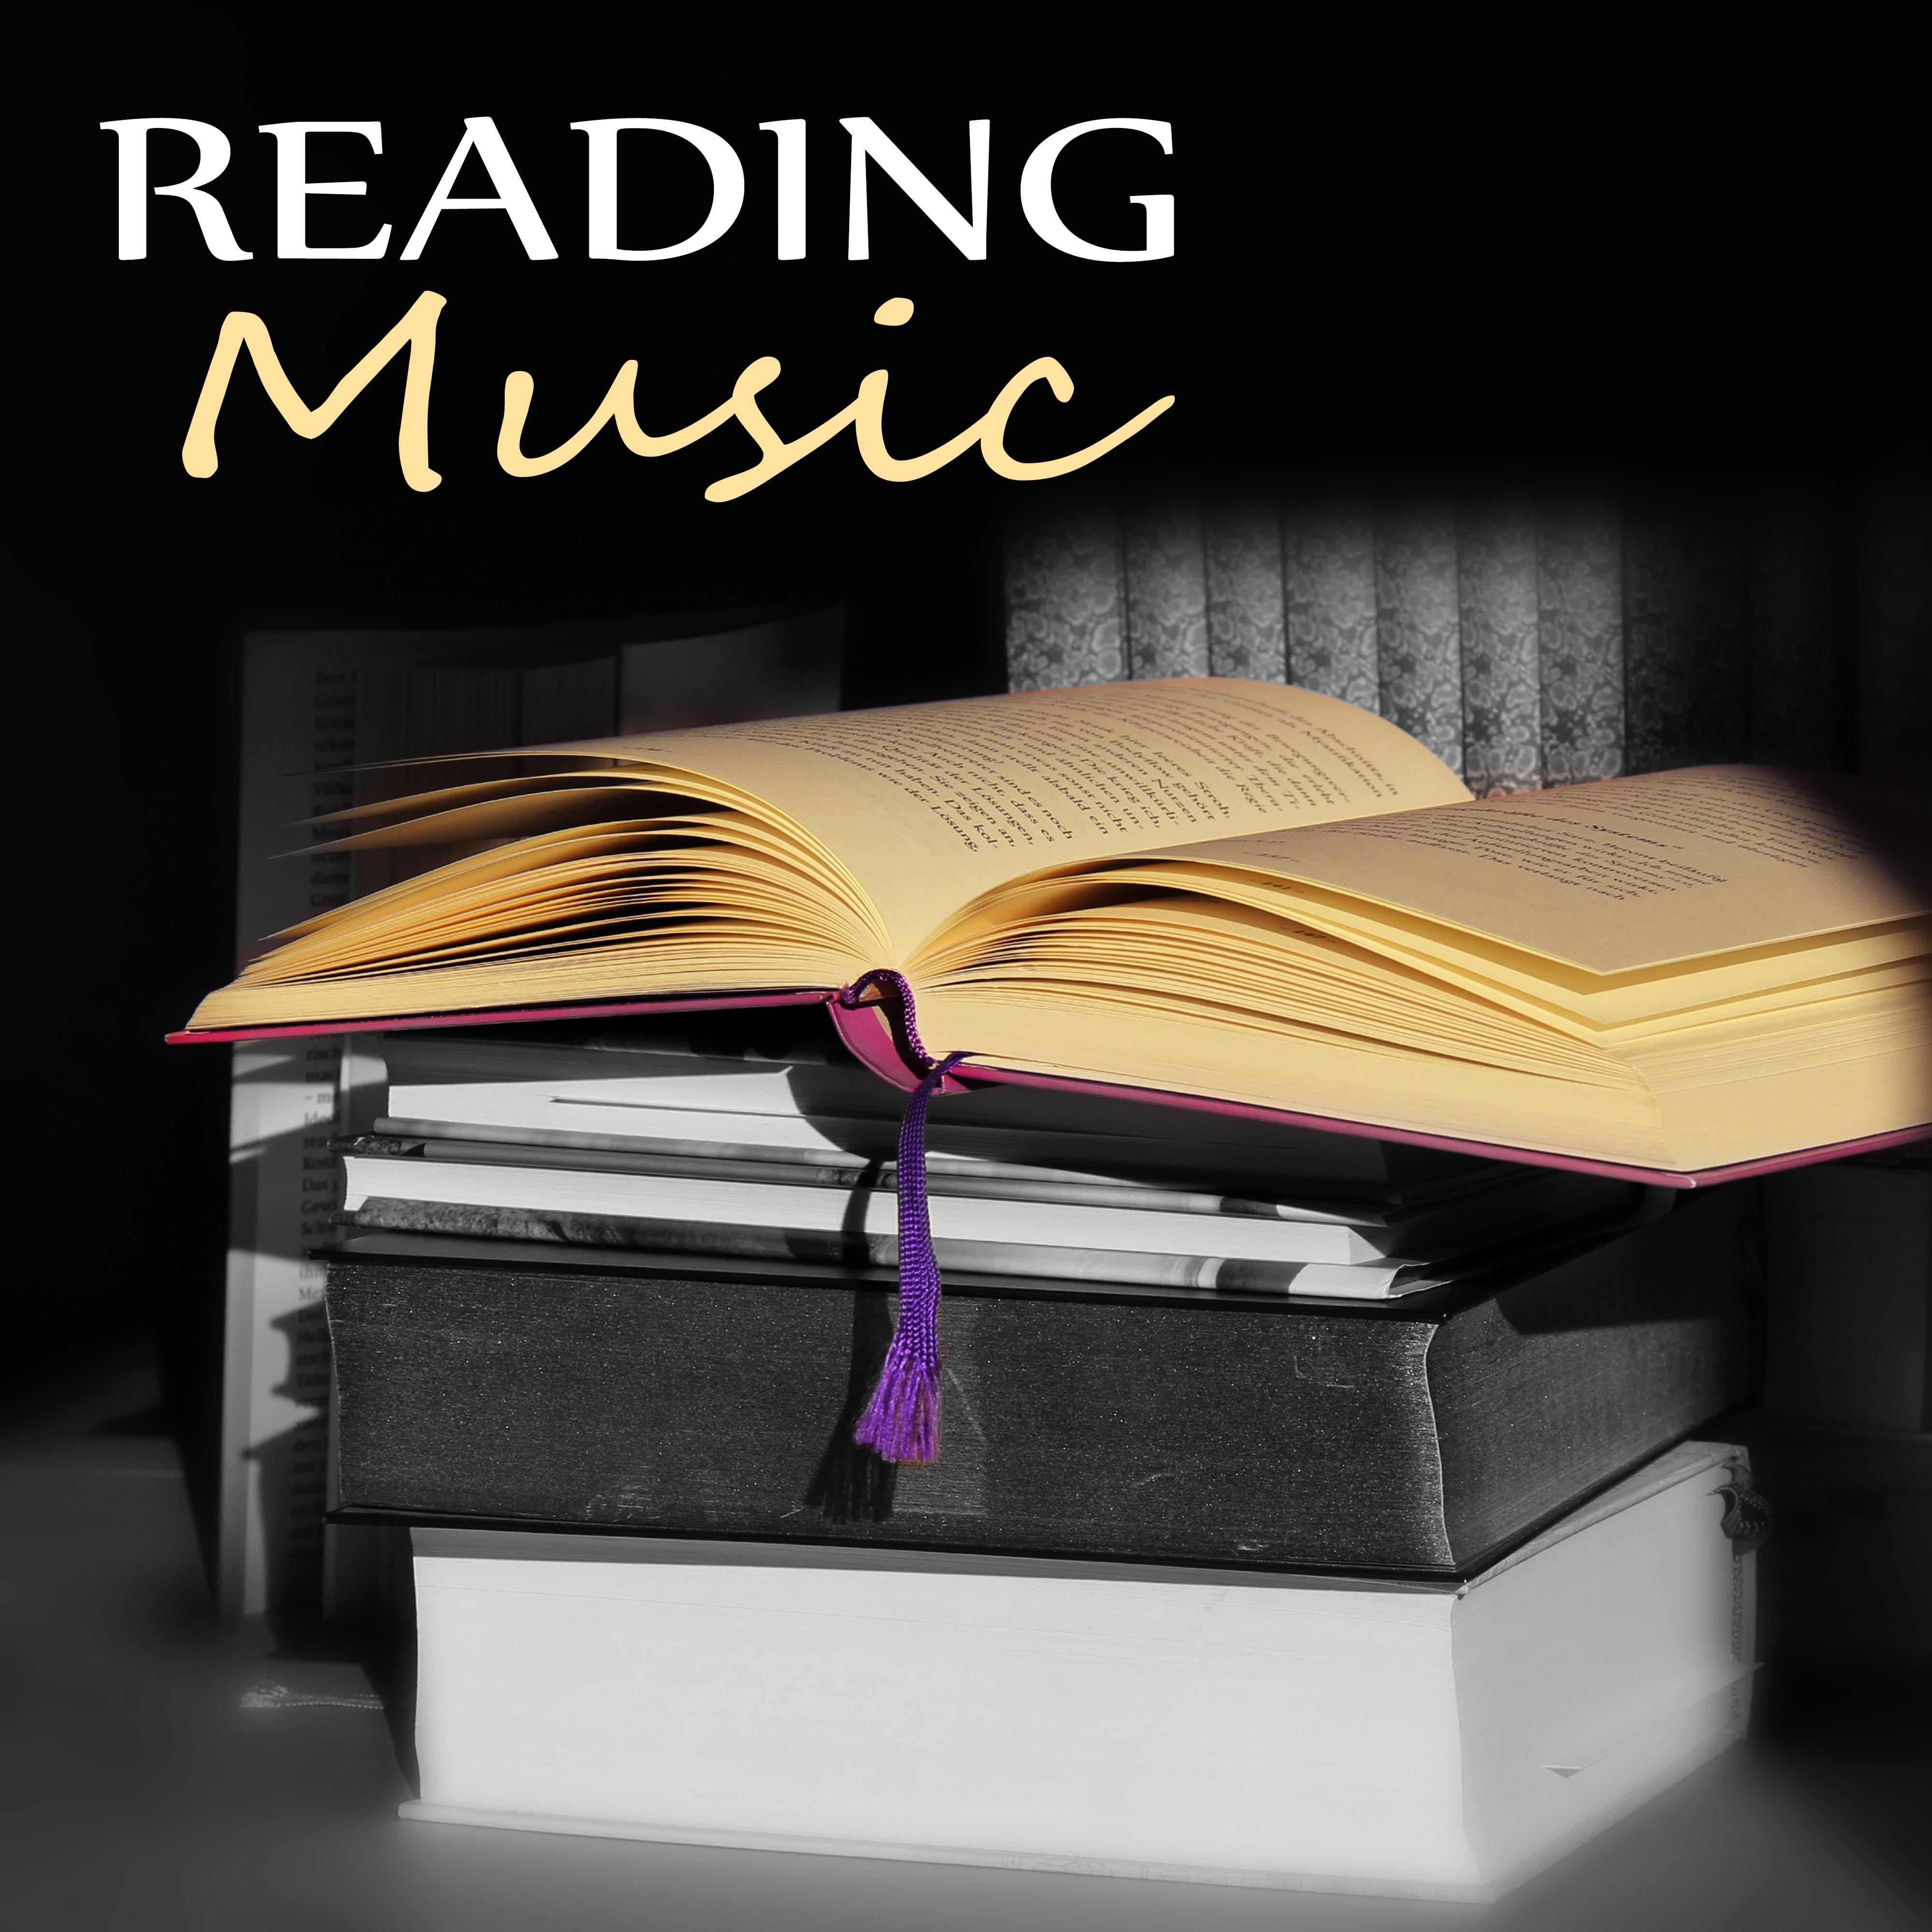 Reading Music  Upgrade Your Brain, New Age Natural Sounds, Concentration Music and Study Music for Your Brain Power